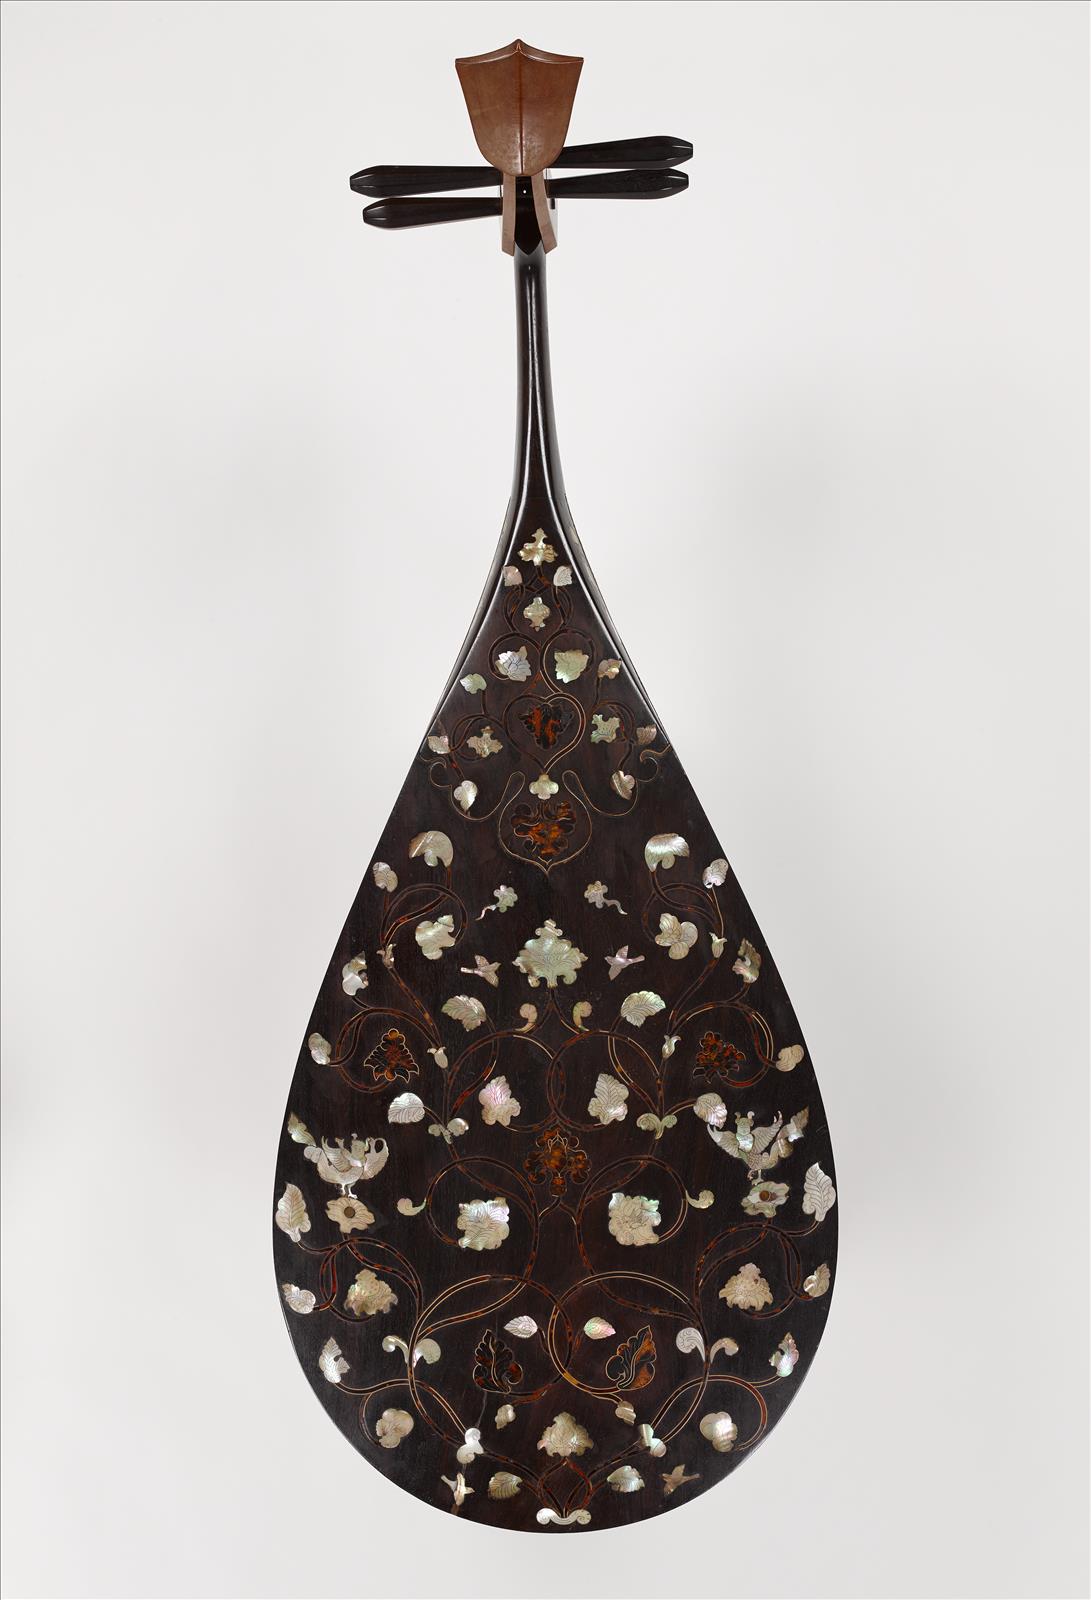 Biwa| lute of |shitan| with mother-of-pearl inlay. - Shosoin